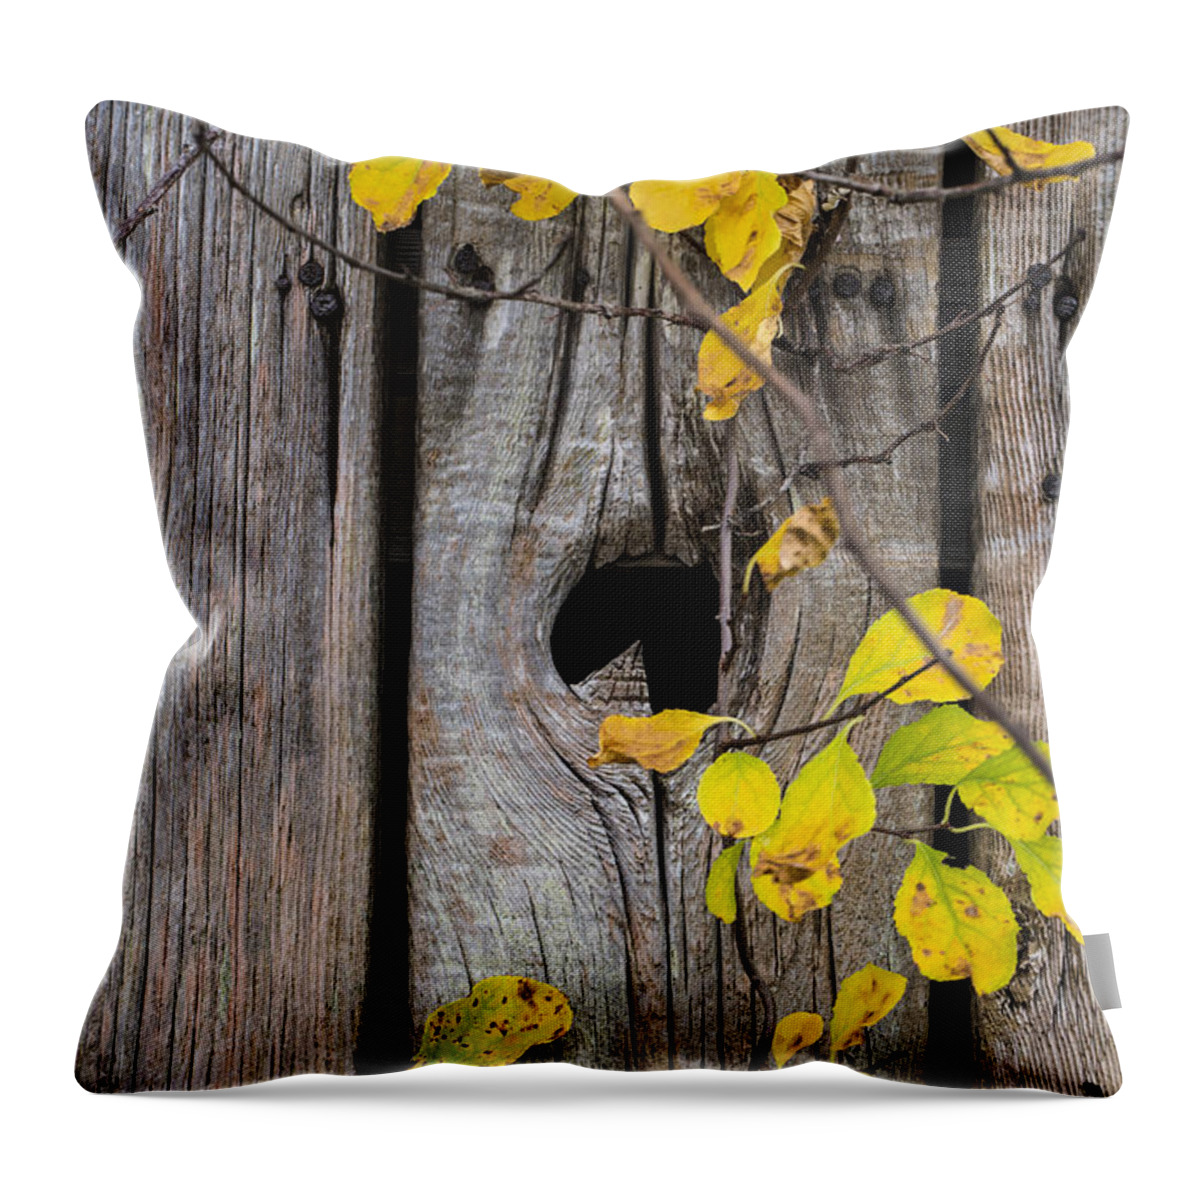 Andrew Pacheco Throw Pillow featuring the photograph The End is Always Near by Andrew Pacheco